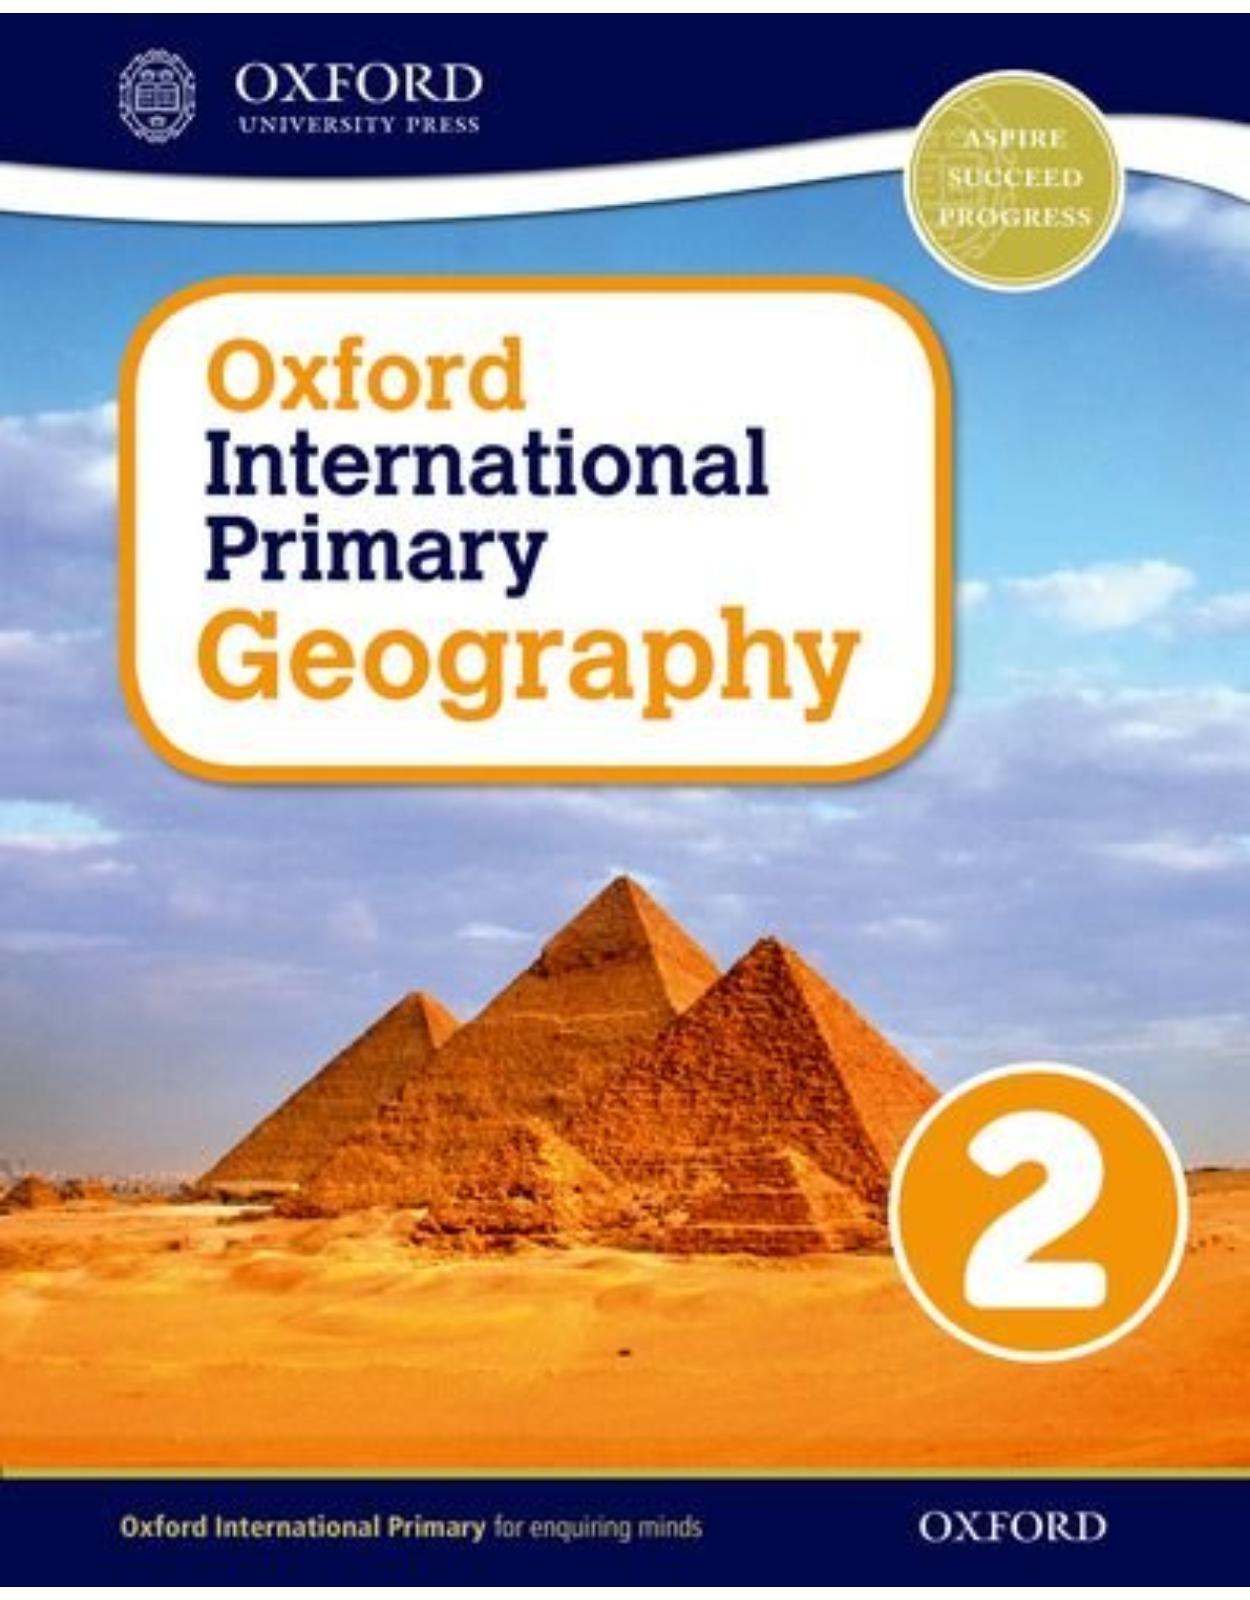 Oxford International Primary Geography: Student Book 2